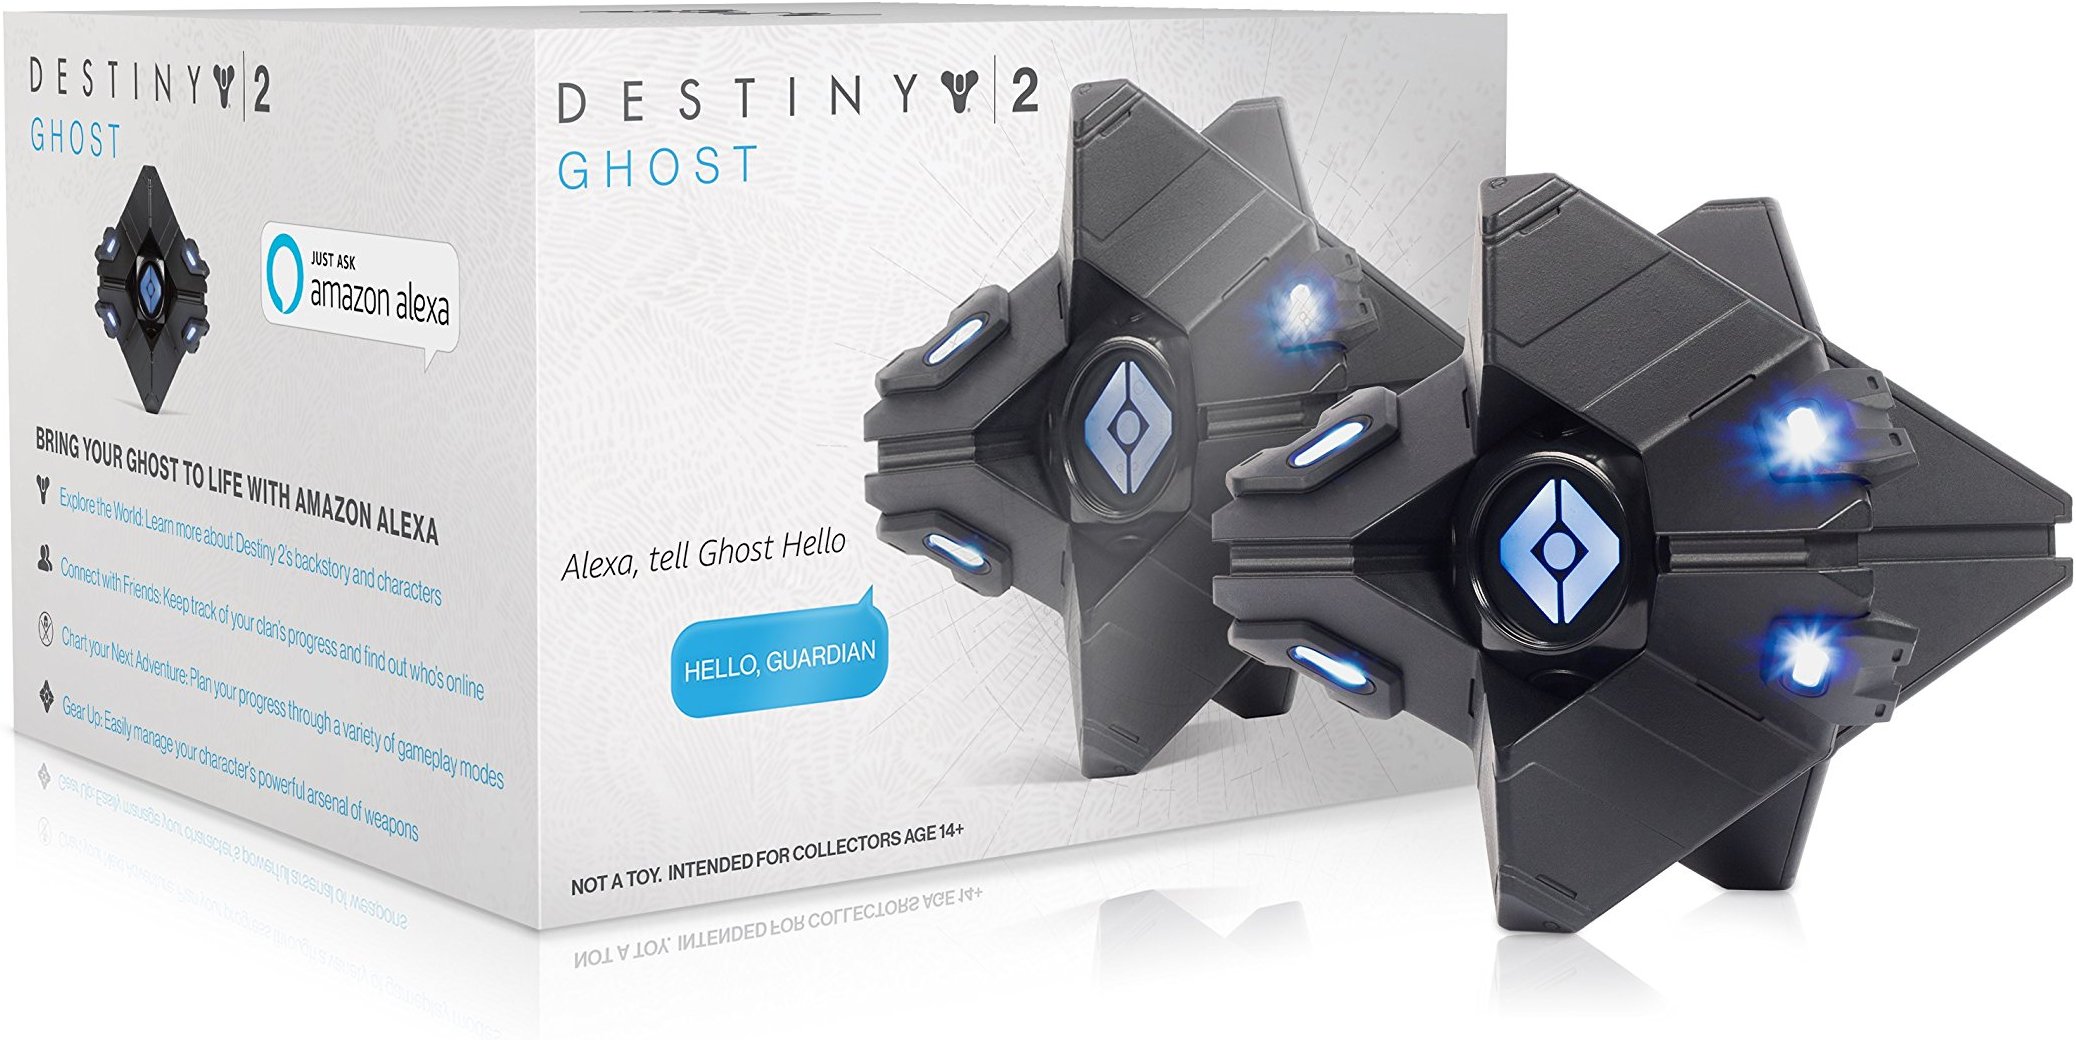 Destiny 2’s Ghost Skill for Amazon Alexa lets you yell at your floating companion for real